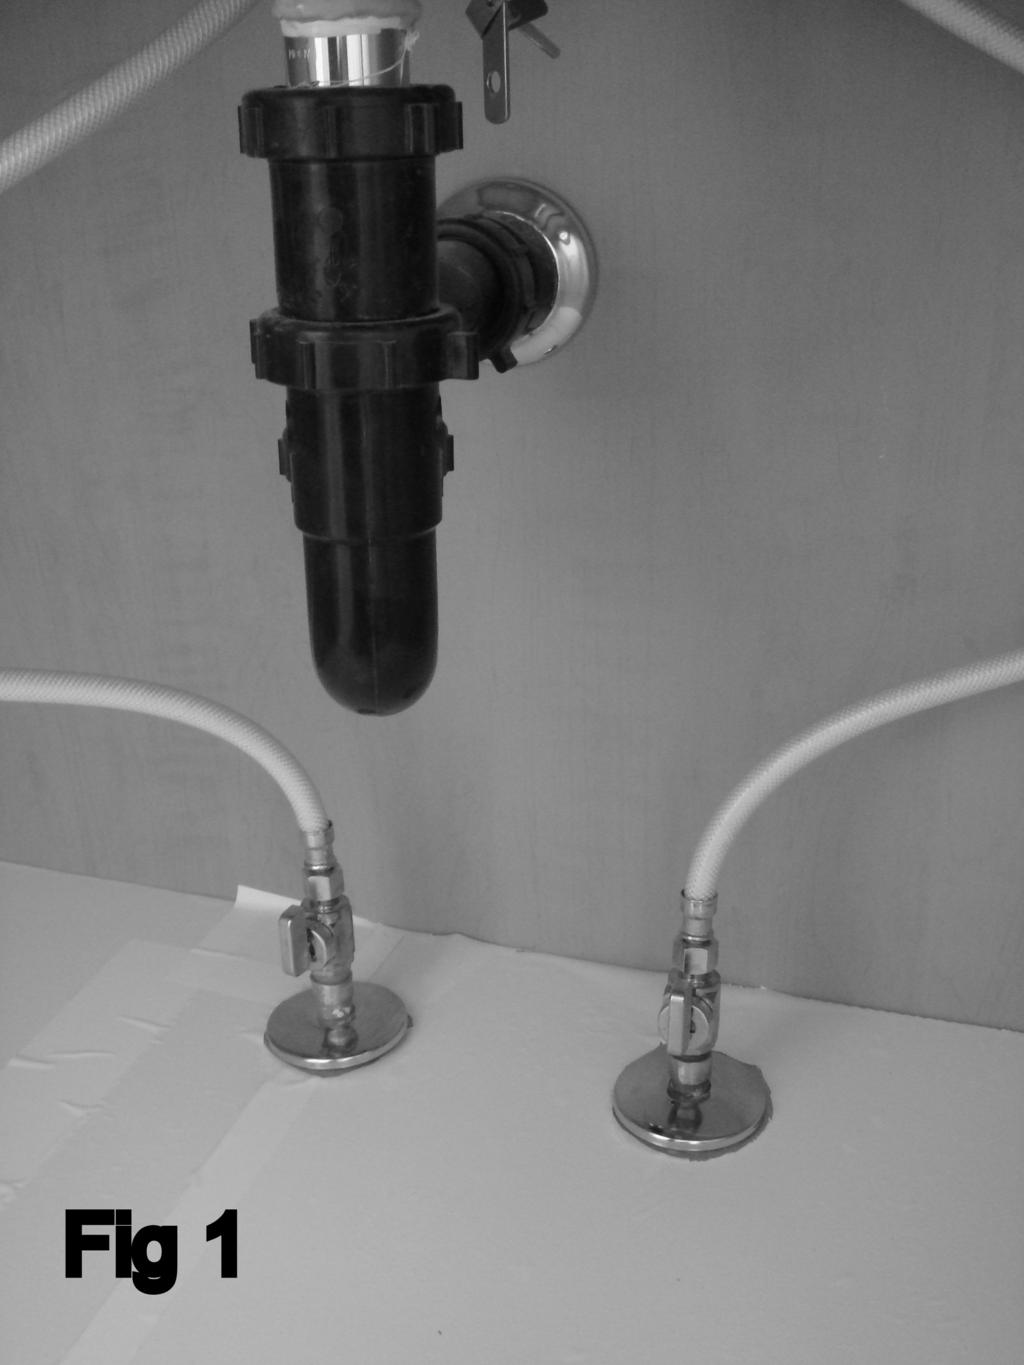 the sink fixture. (Fig 1) 2. Open the faucet to relieve any system pressure. 3.